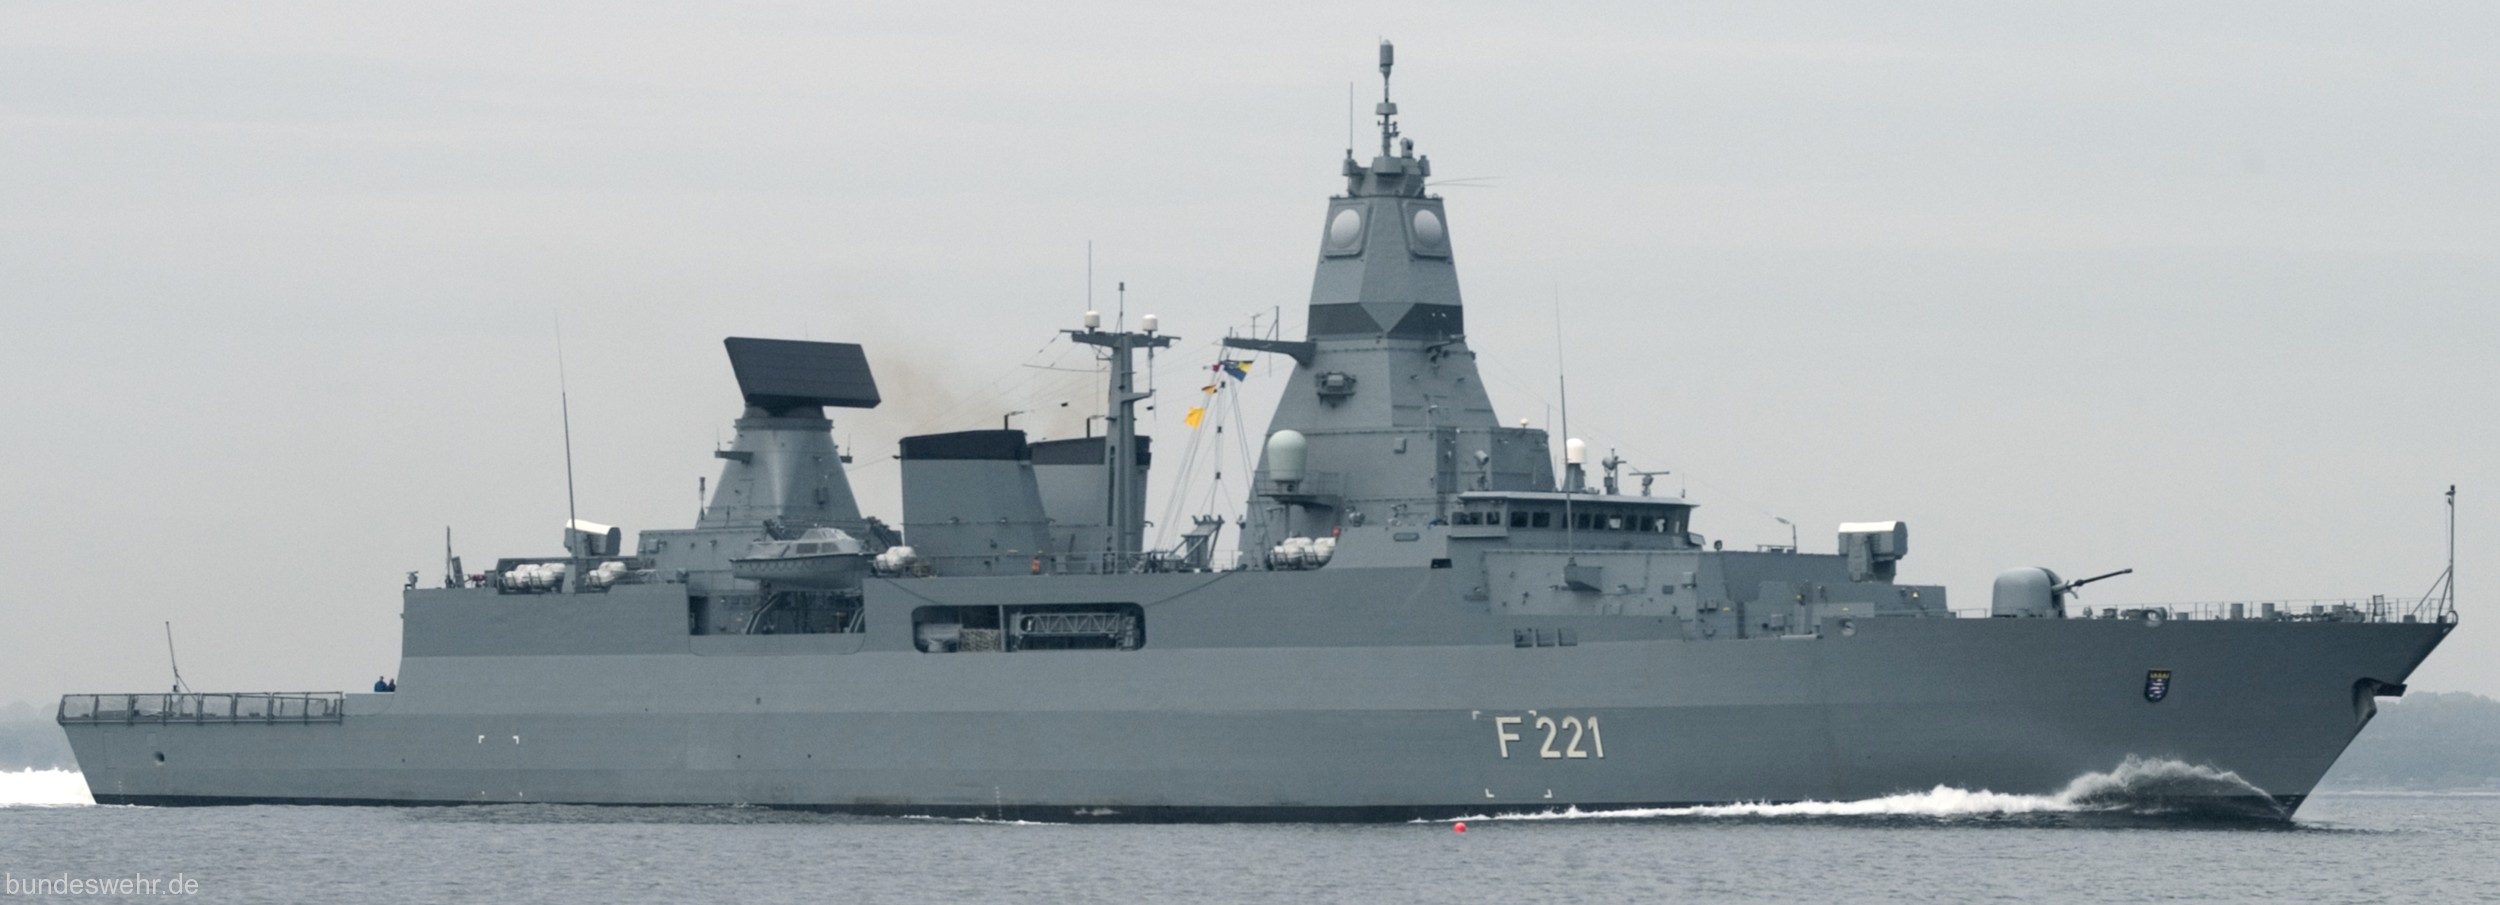 f-221 fgs hessen type 124 sachsen class guided missile frigate german navy 20